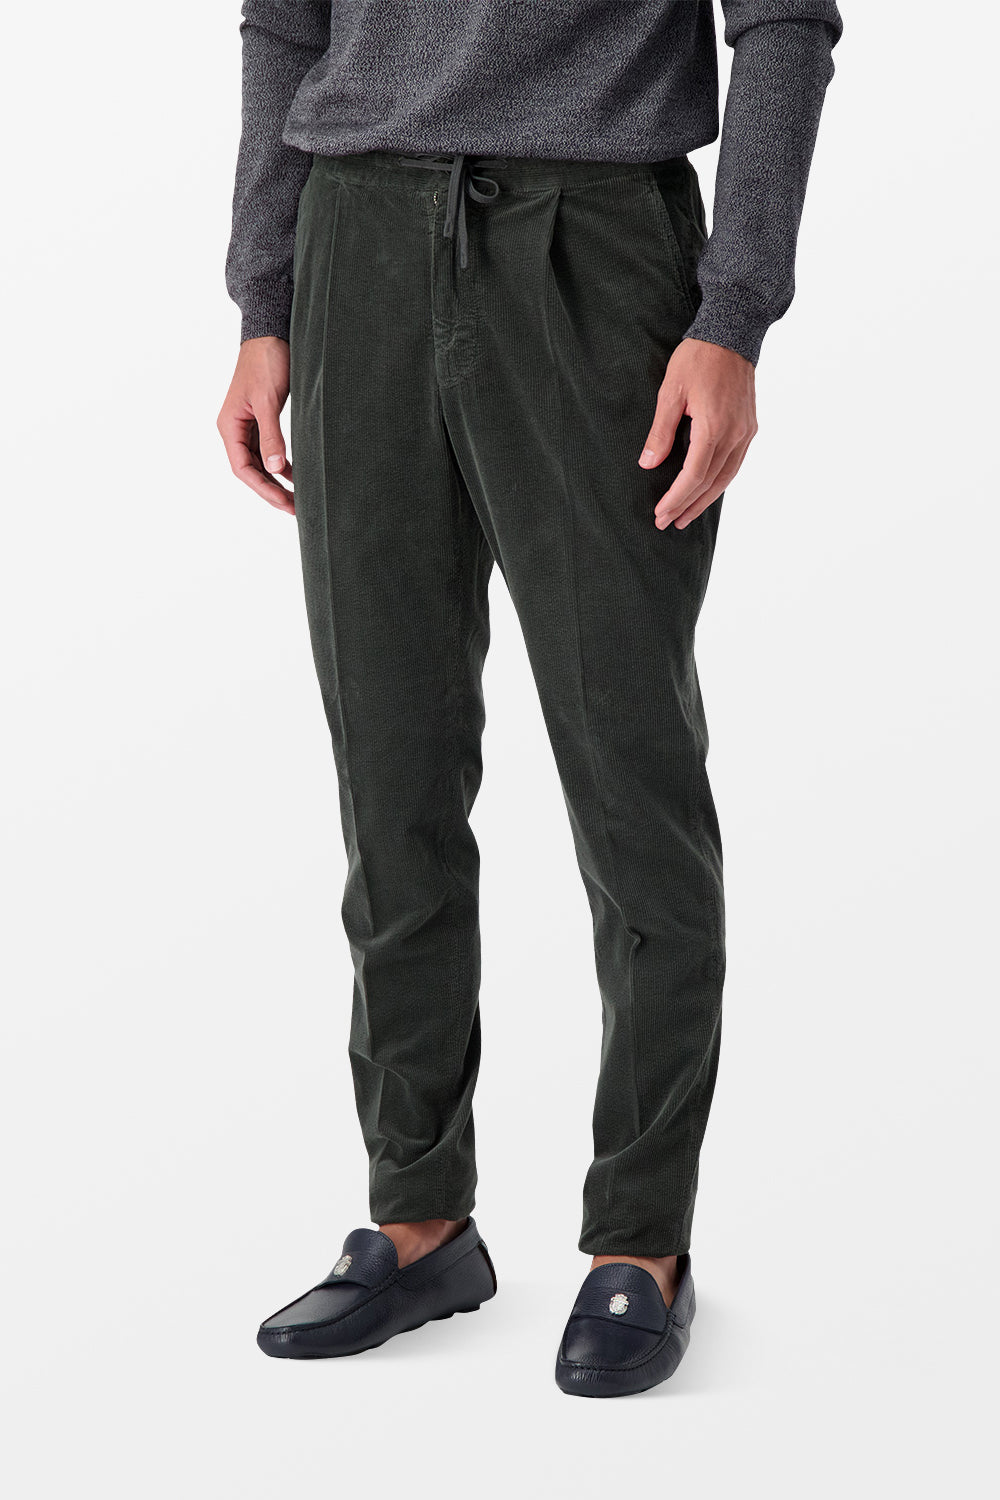 Incotex Grey Casual Trousers